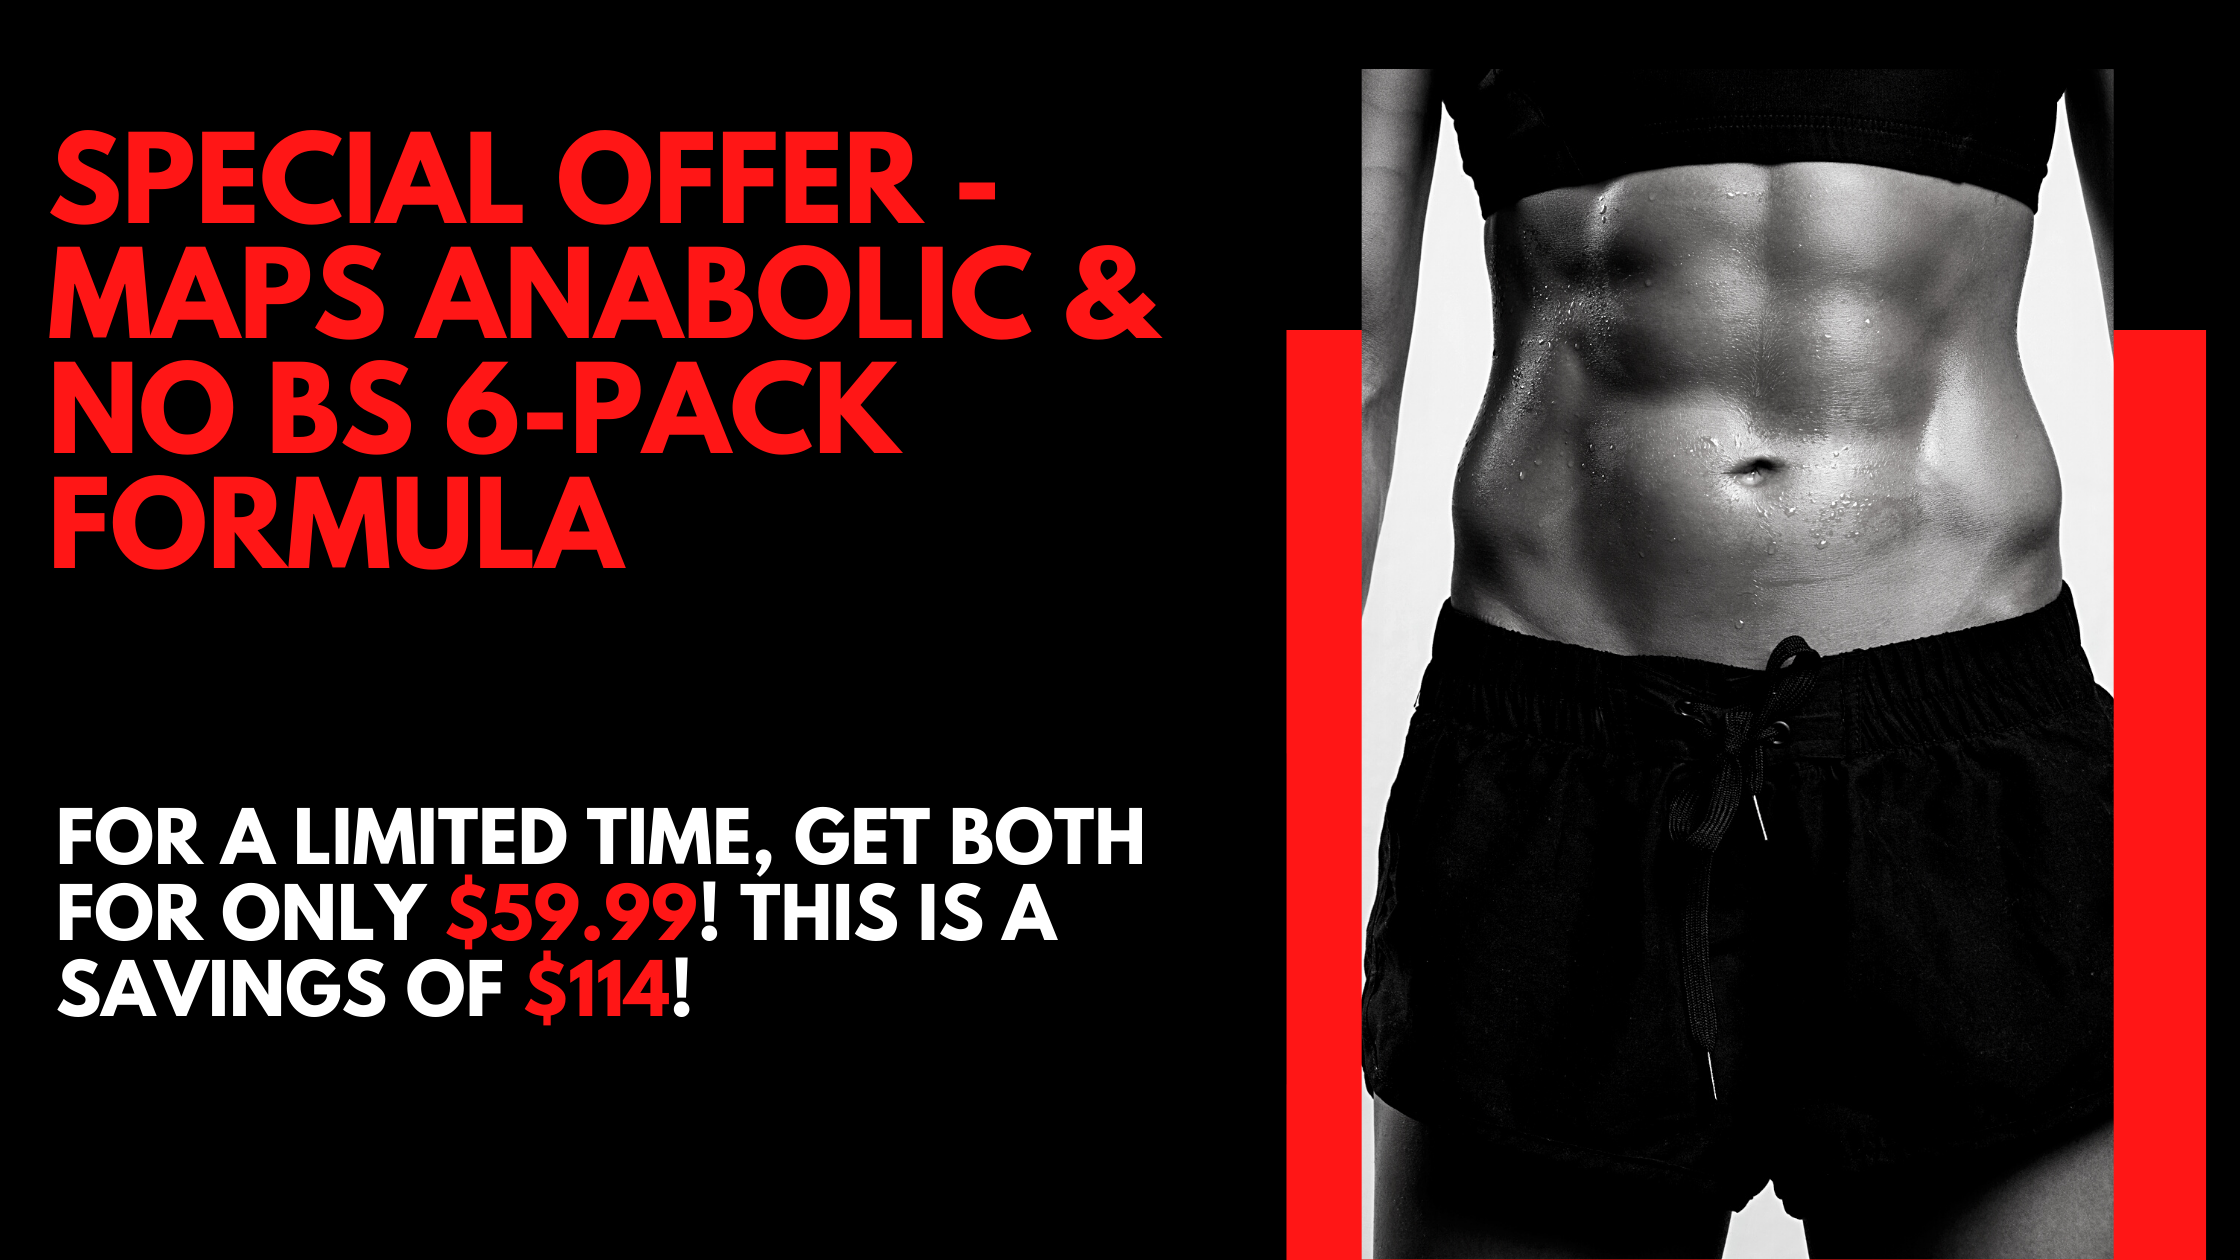 MAPS Anabolic & NO BS 6-Pack Formula